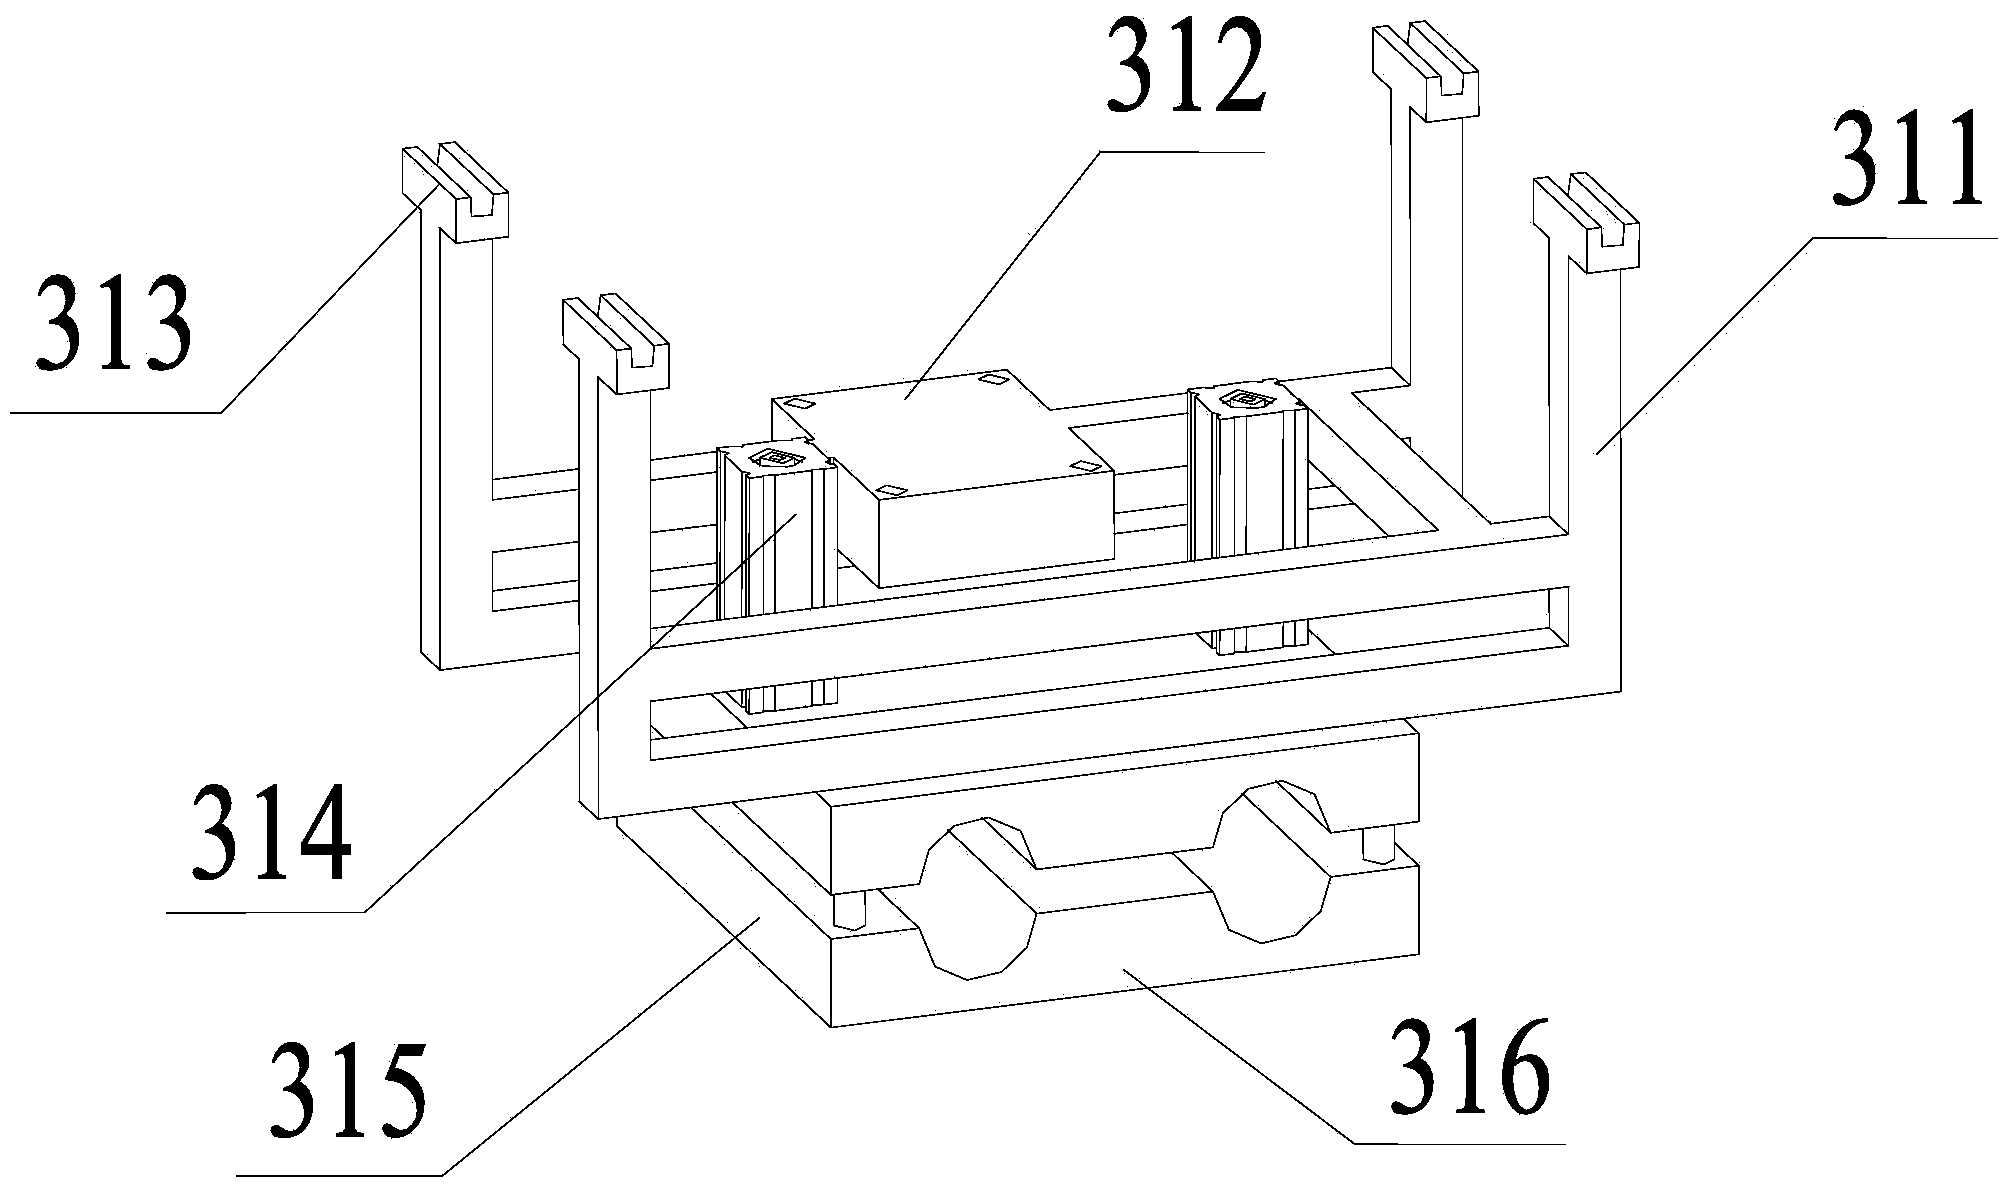 Heat-preserving pipe penetration device